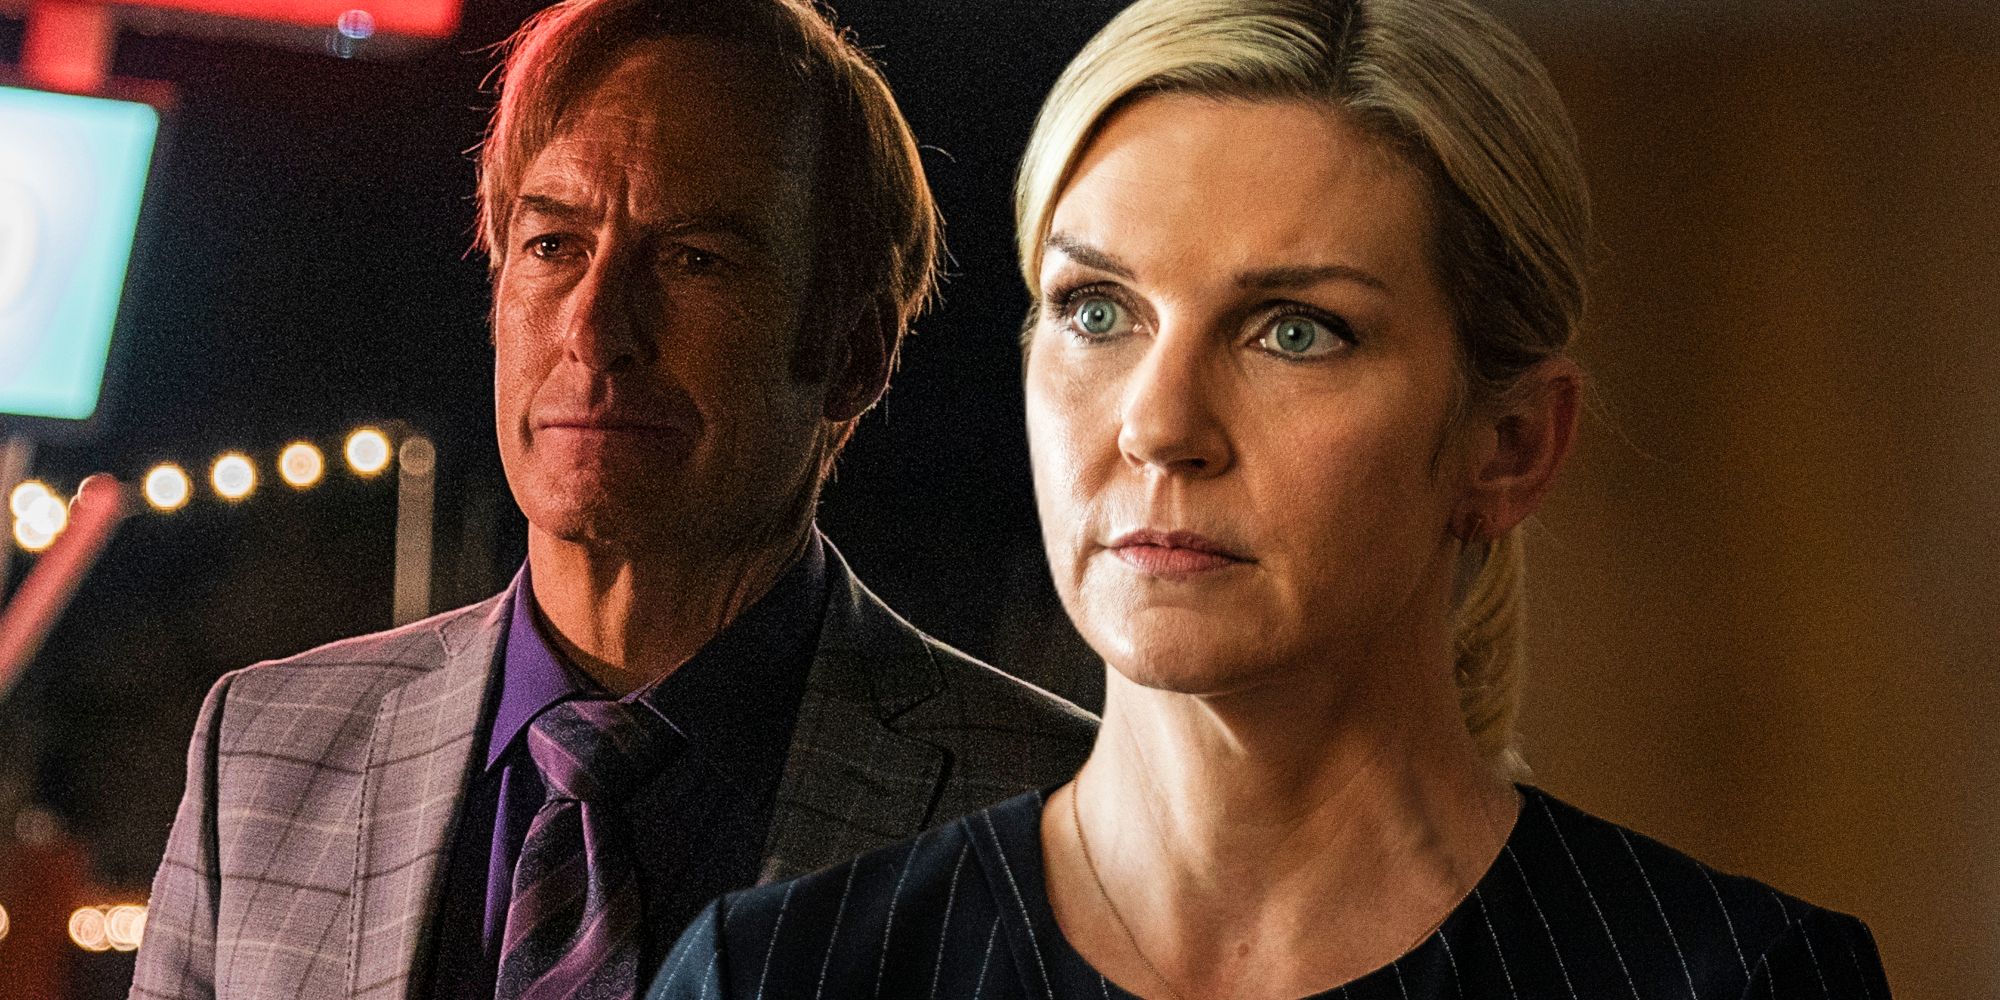 Saul and Kim in Better Call Saul